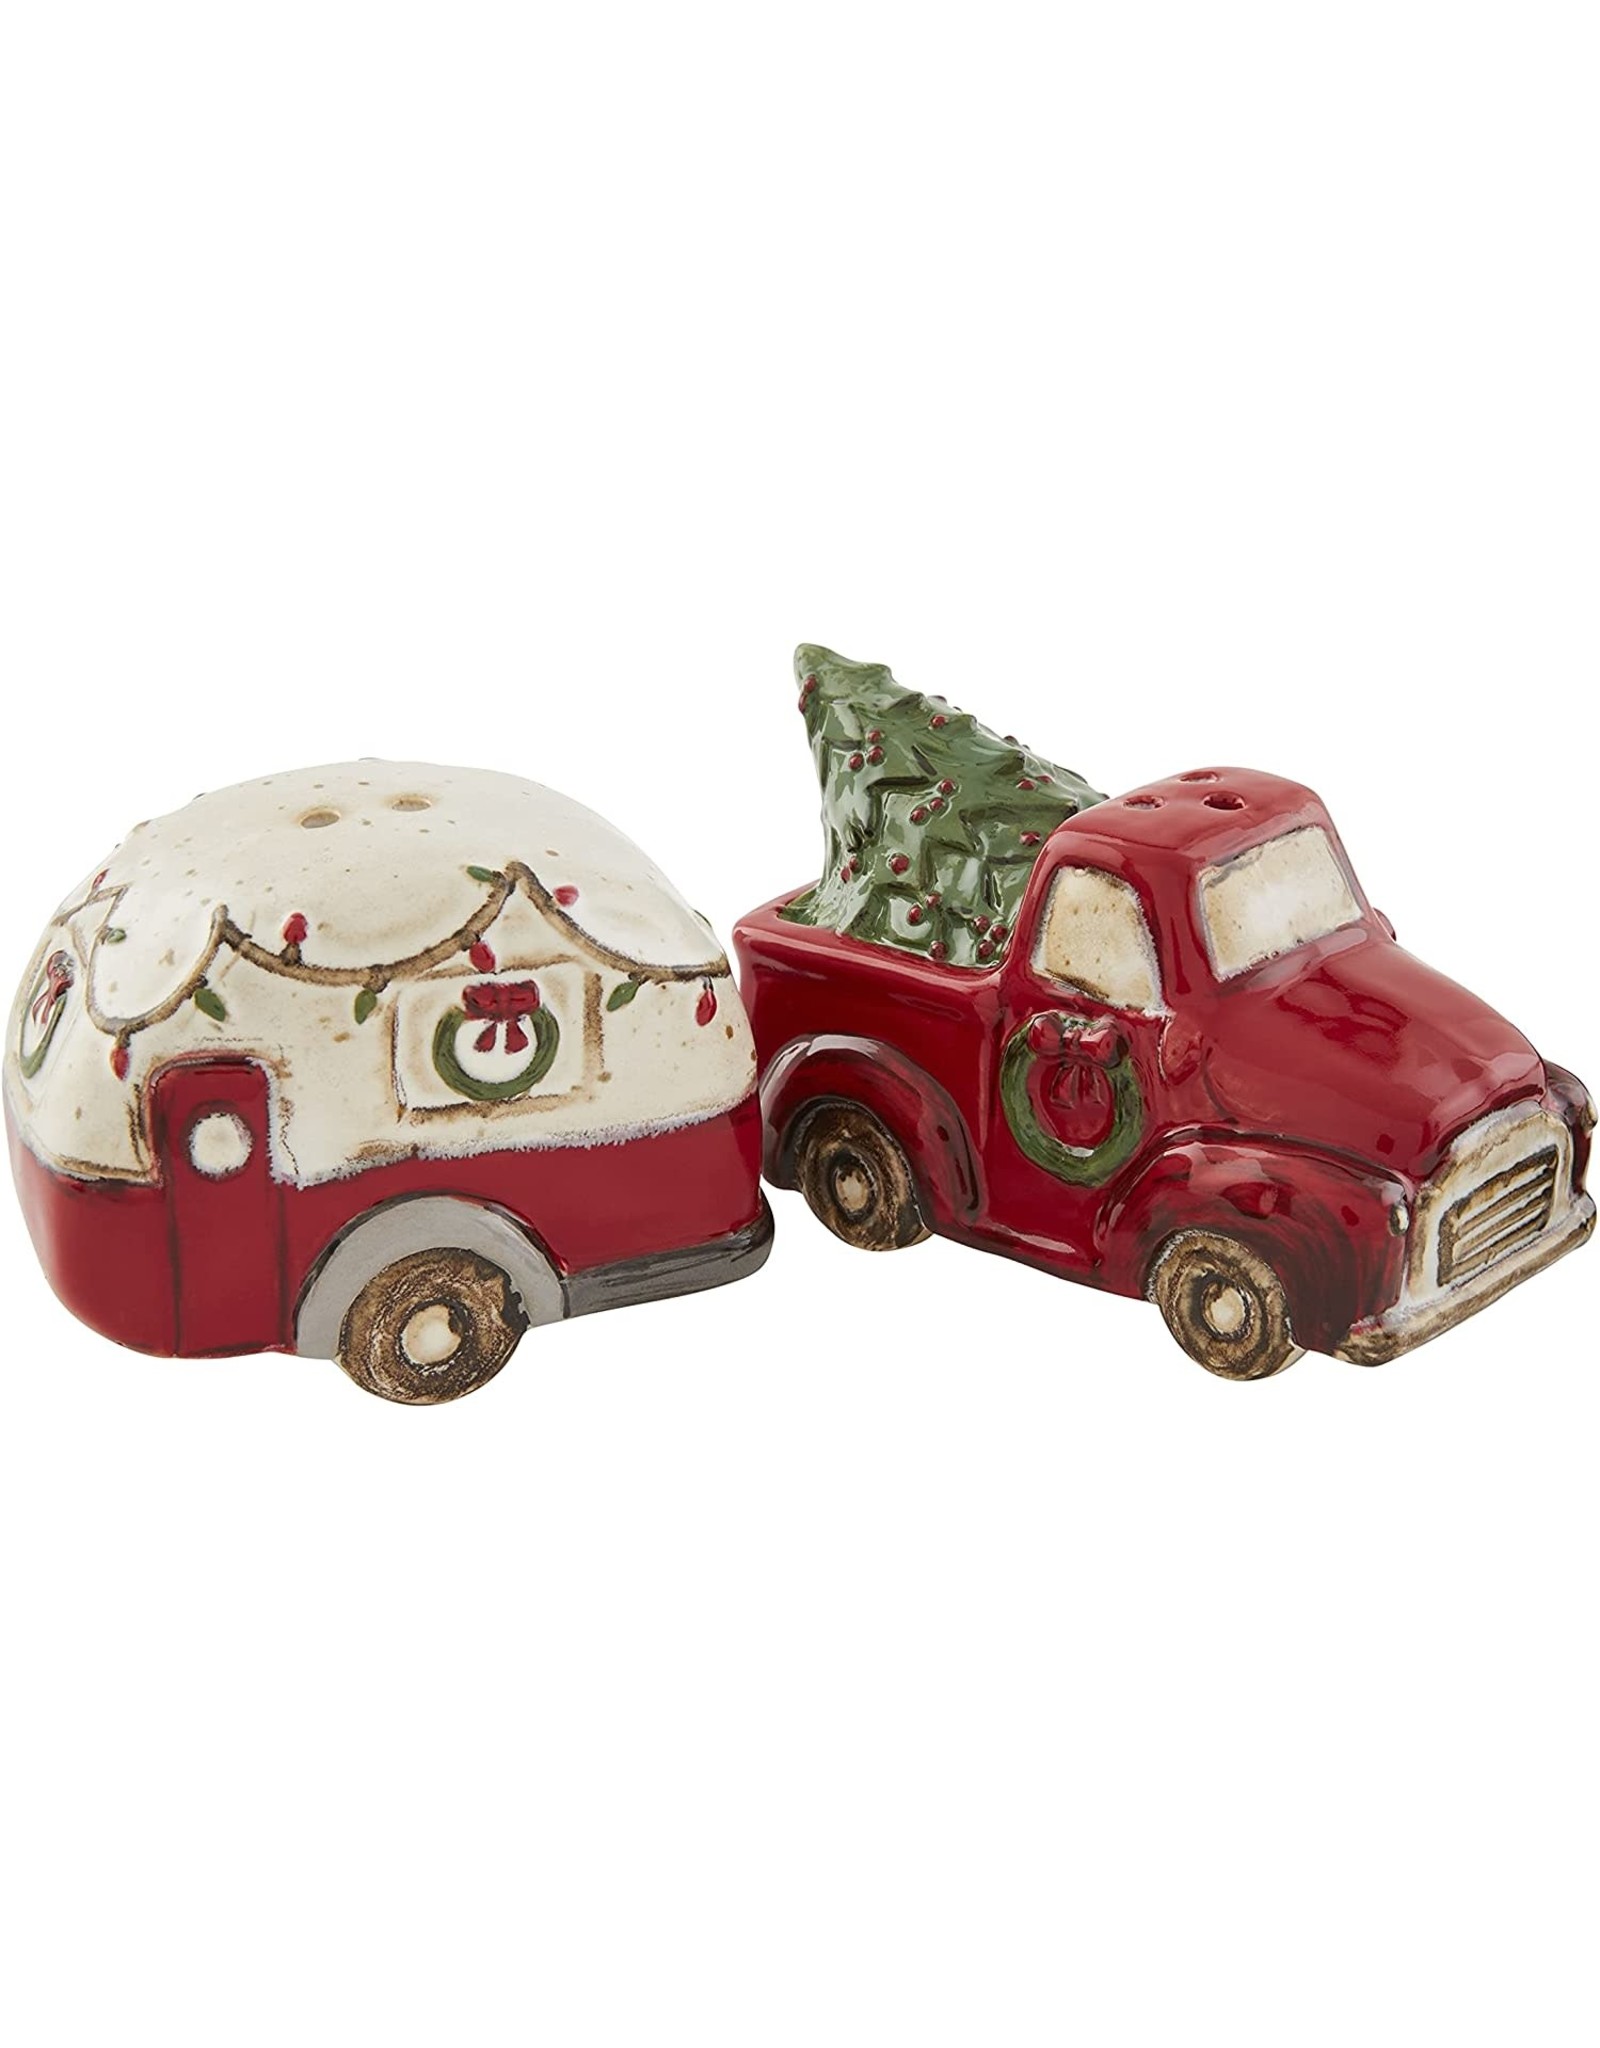 Mud Pie Christmas Truck And Camper Salt And Pepper Shakers Set